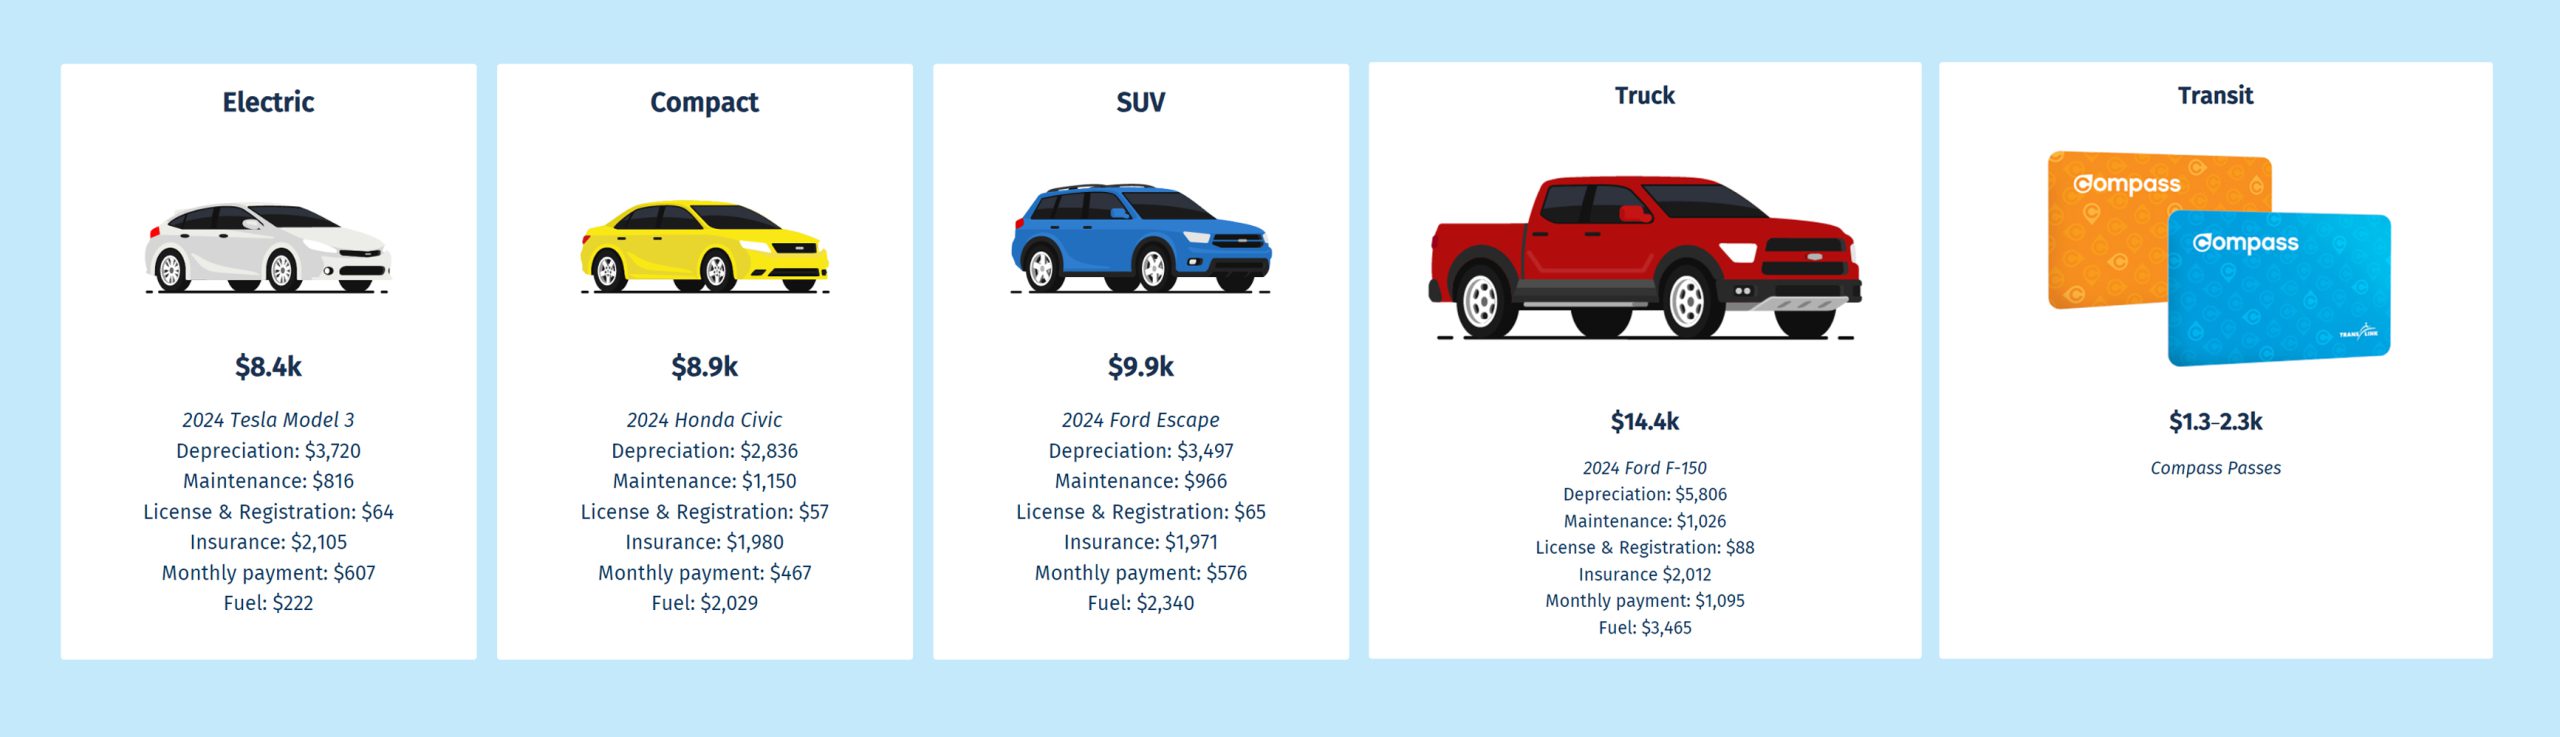 Annual cost comparison of owning a car versus monthly public transport passes.